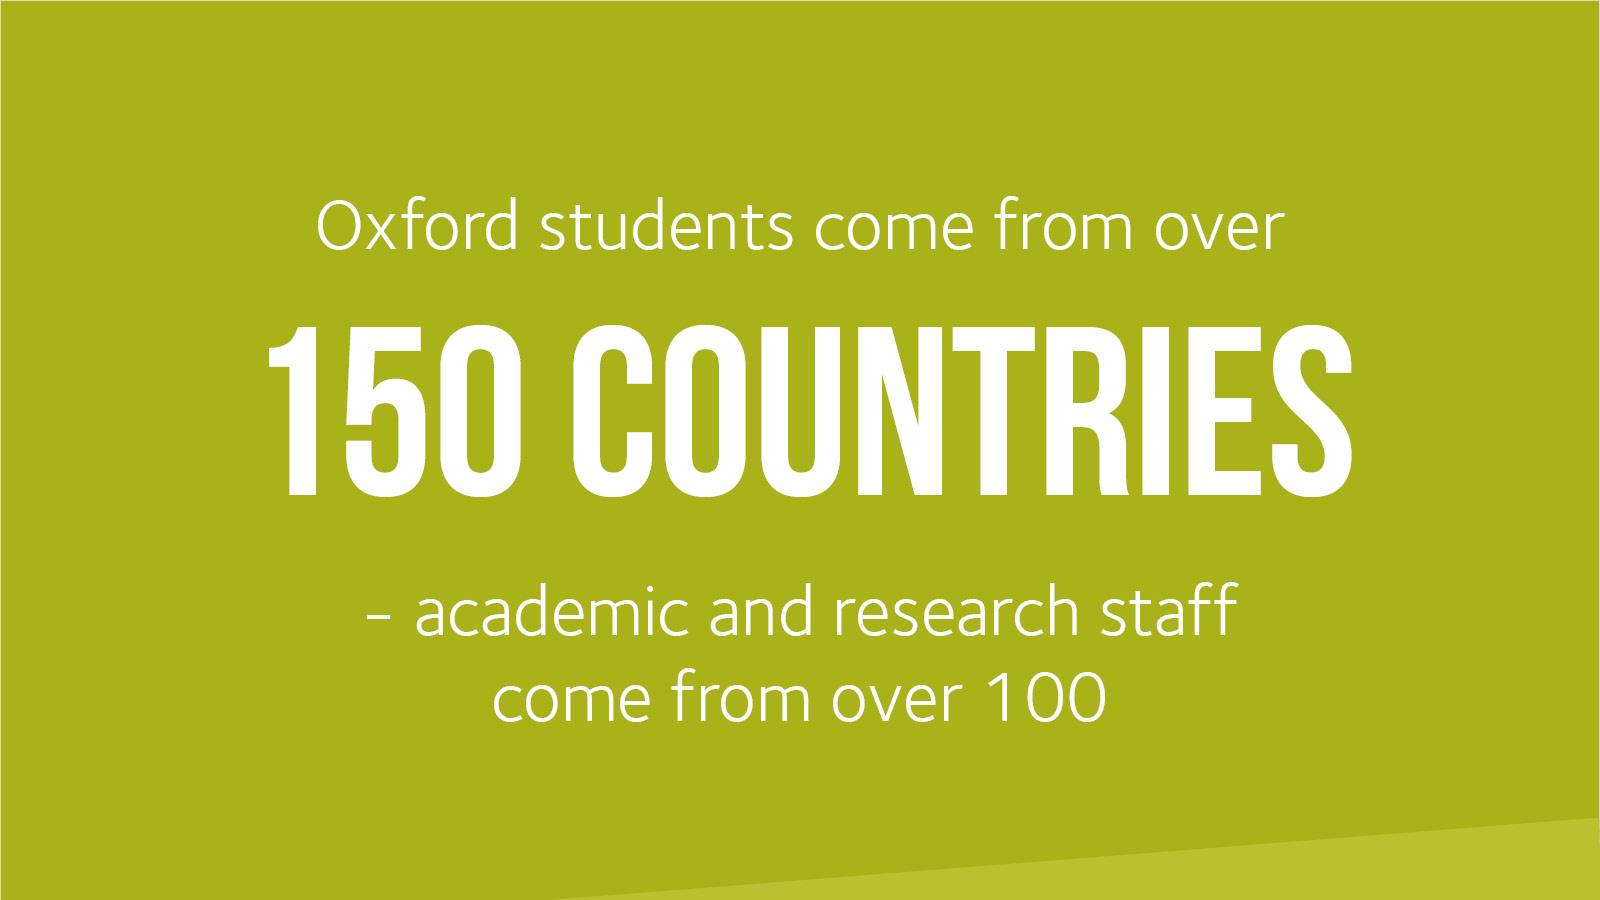 Our students come from over 150 countries. Academic and research staff come from over 100.